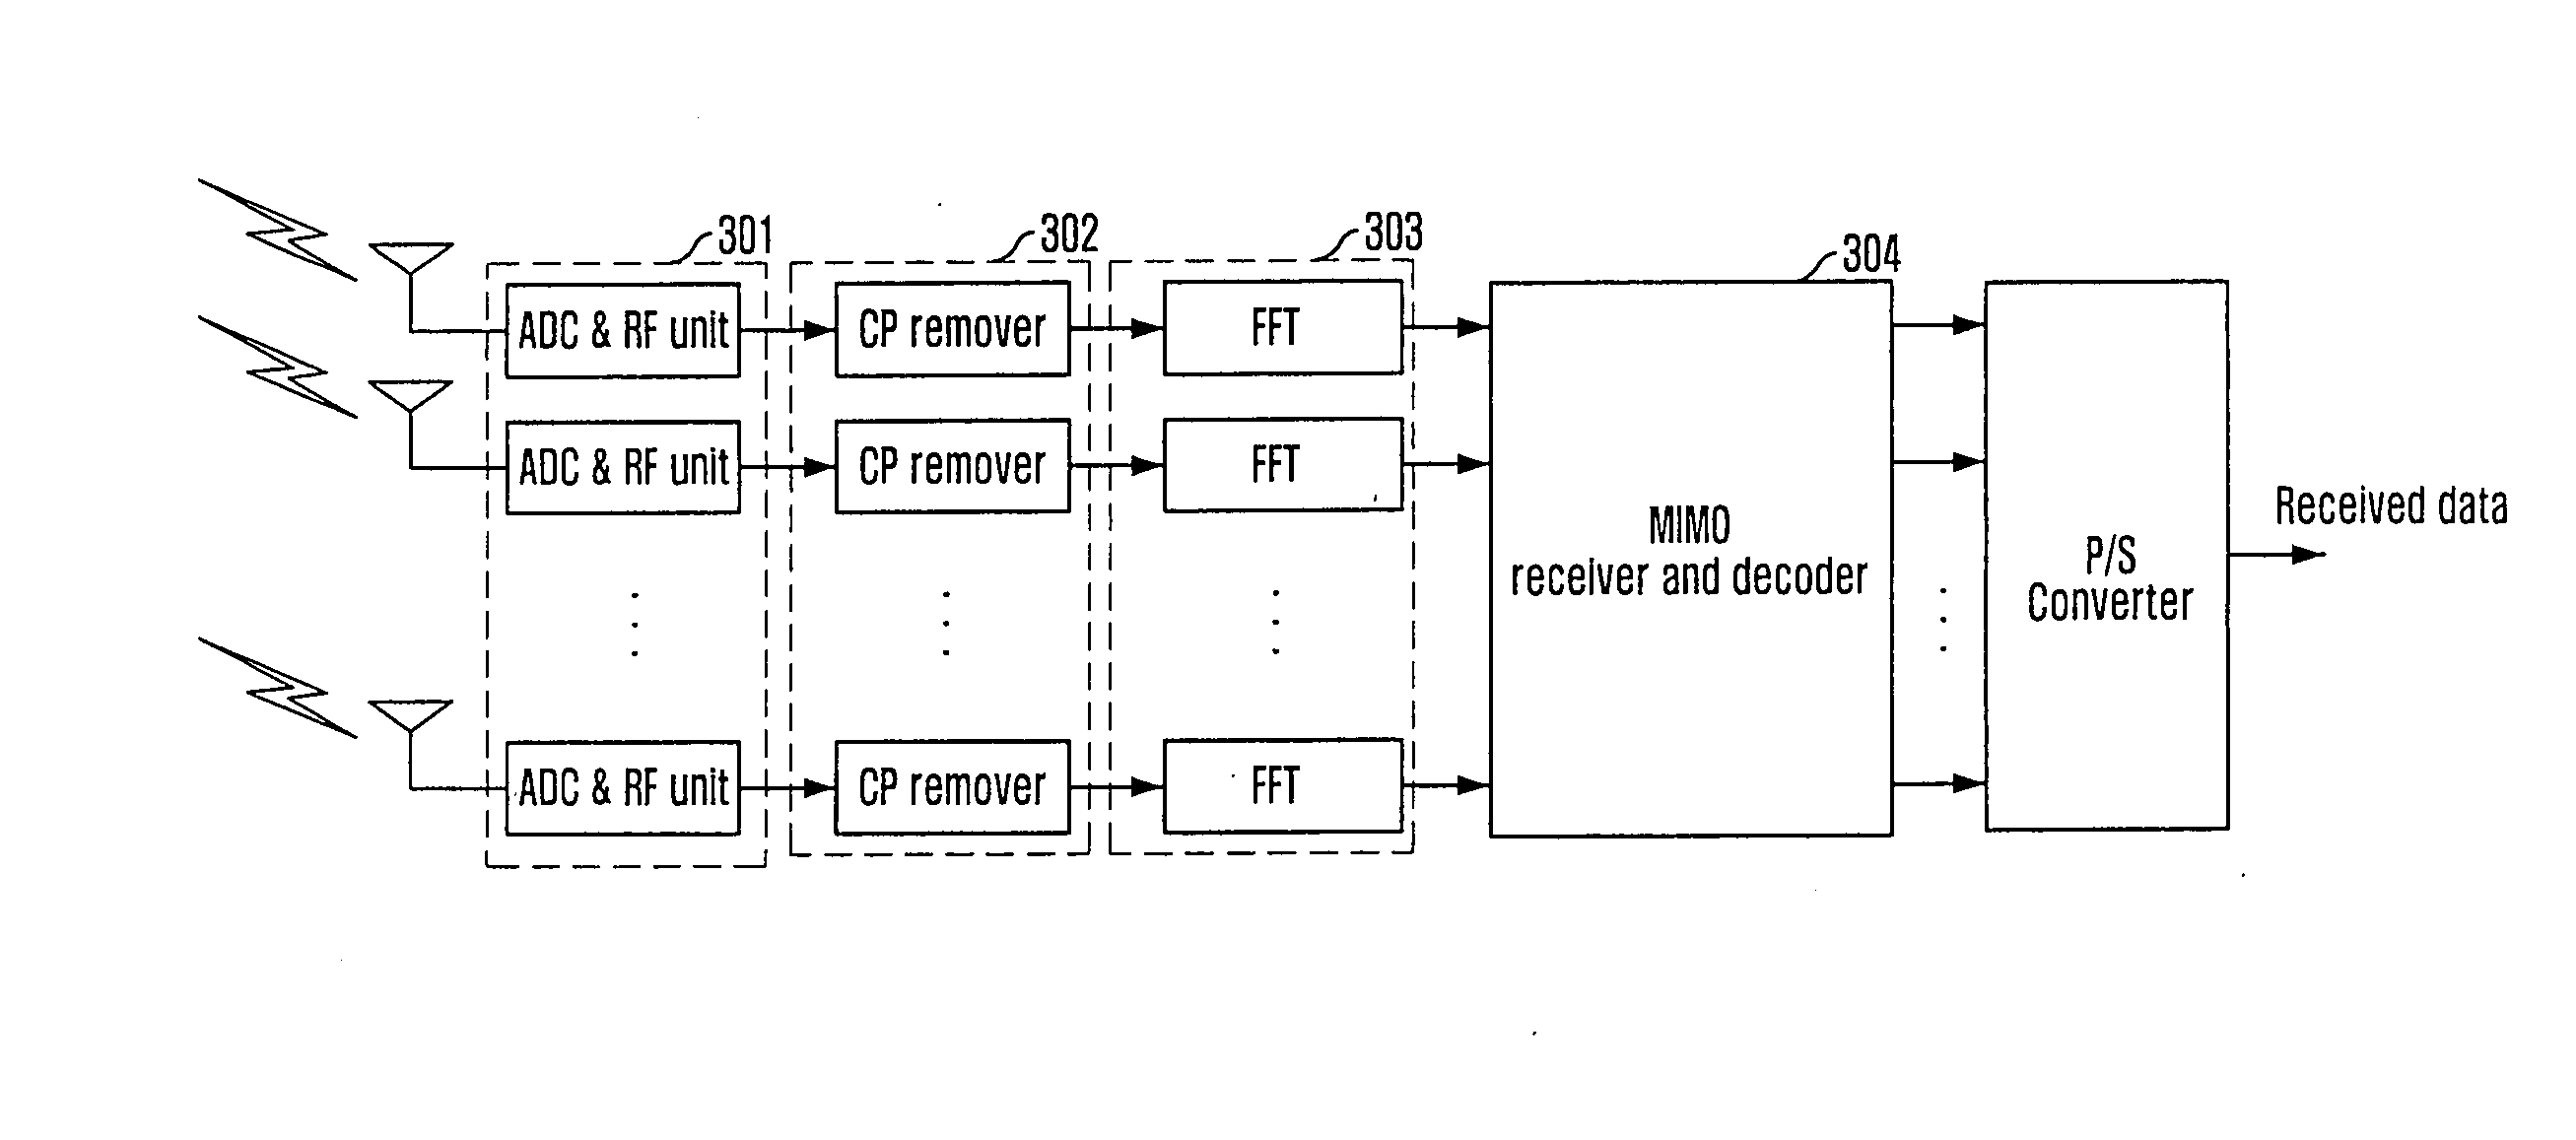 MIMO receiver, qr decomposition and multi-dimensional detection used in the MIMO receiver